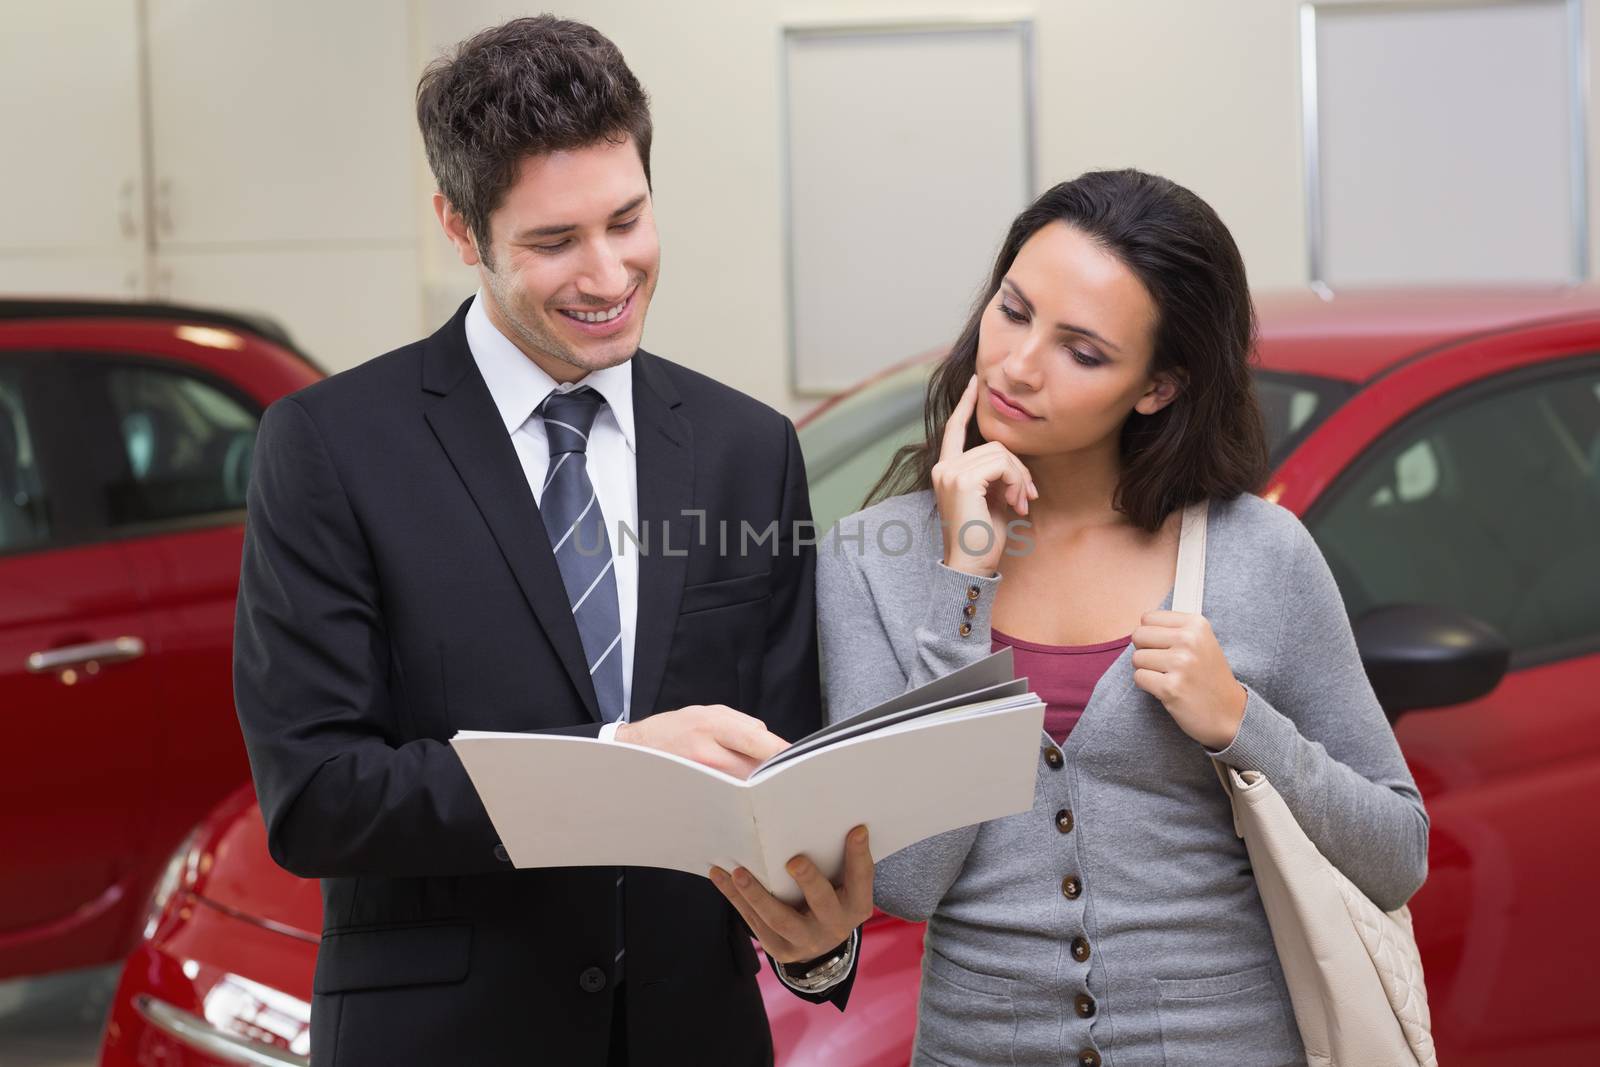 Salesman showing brochure to customer and smiling at new car showroom